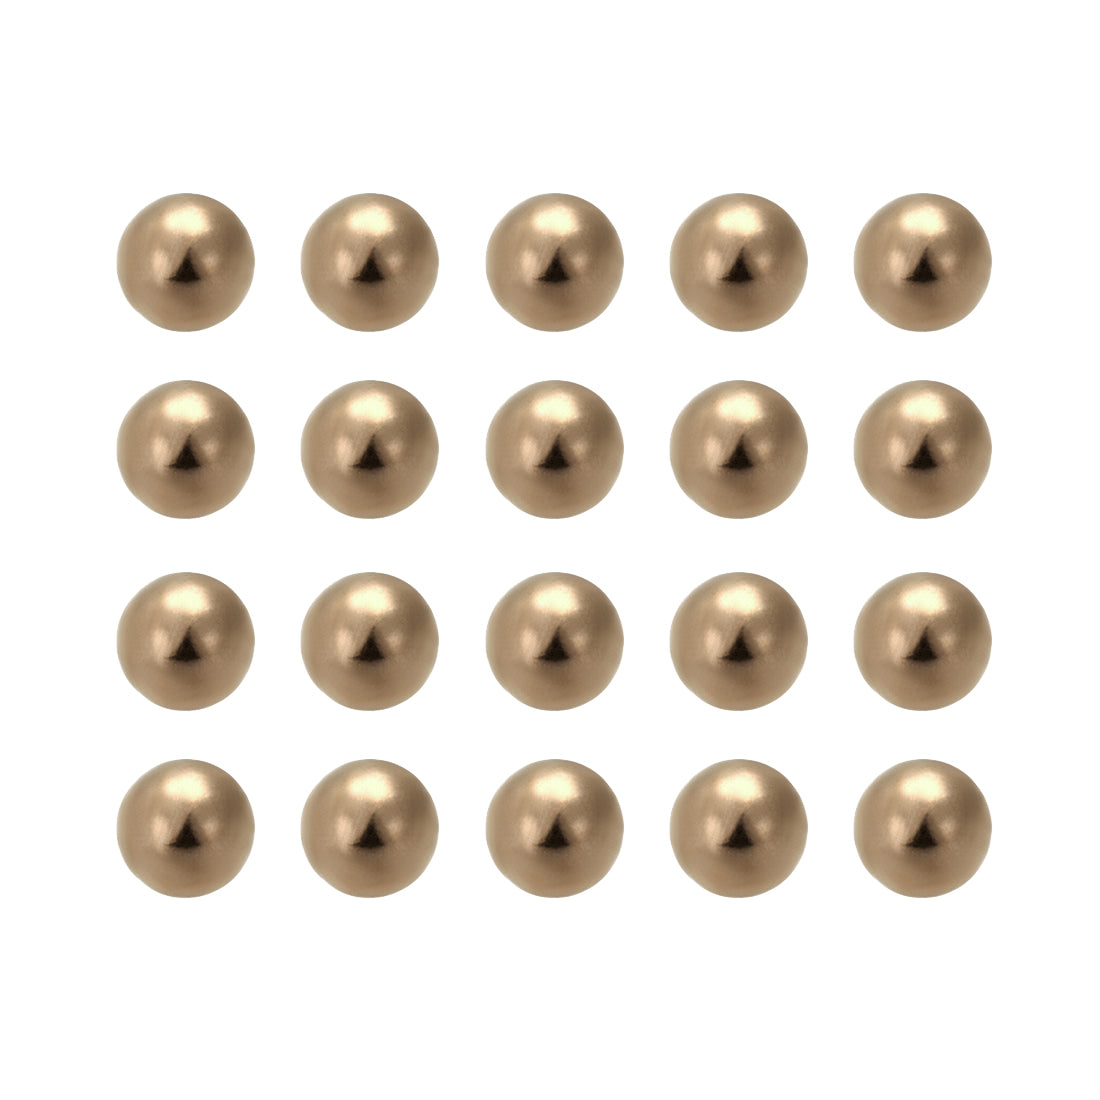 Uxcell Uxcell 2.8mm Precision Solid Brass Bearing Balls 30pcs